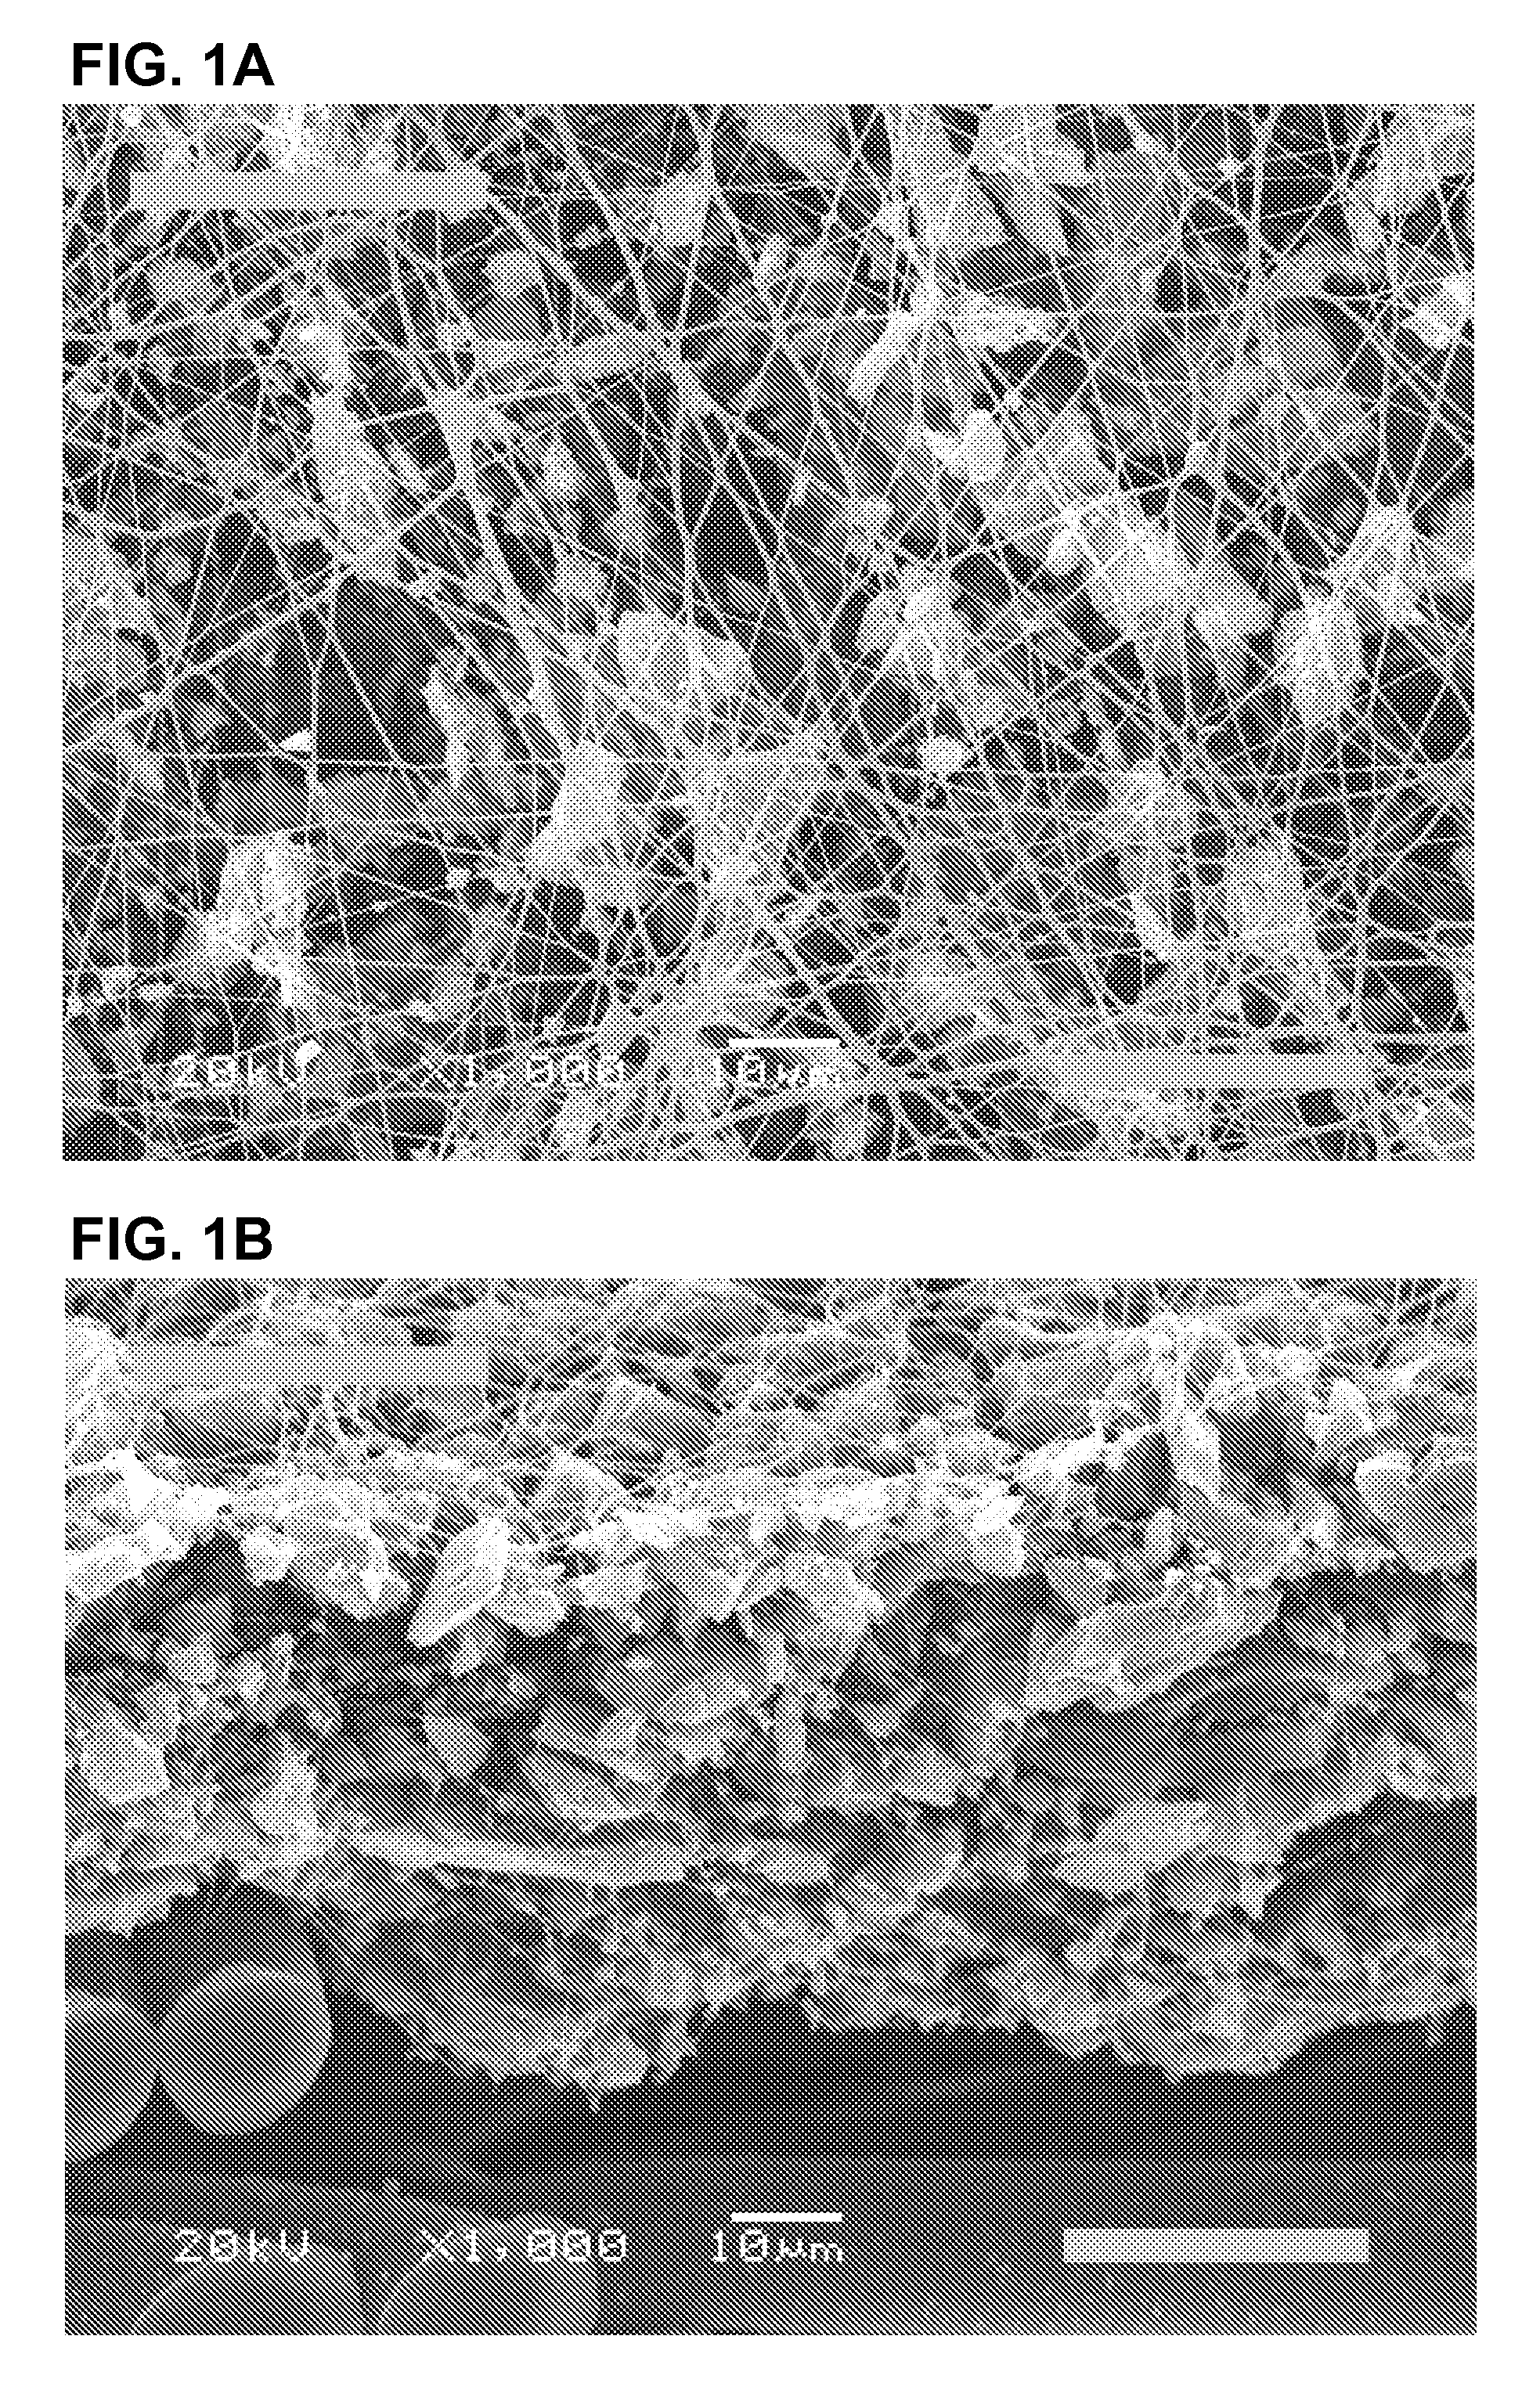 Web comprising fine fiber and reactive, adsorptive or absorptive particulate